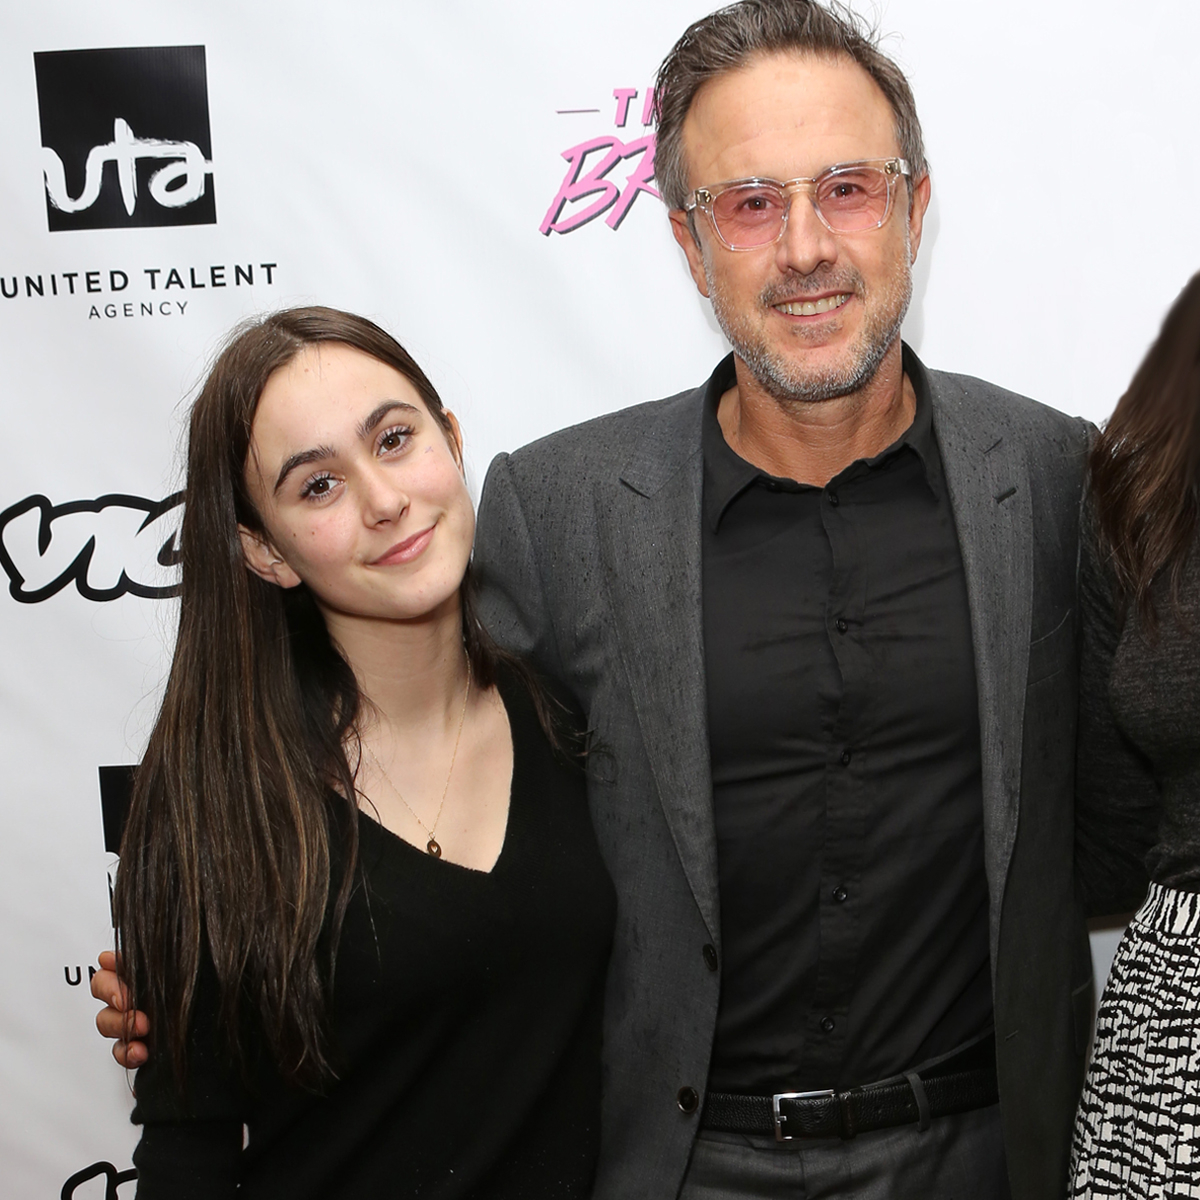 David Arquette says he owes his daughter an apology